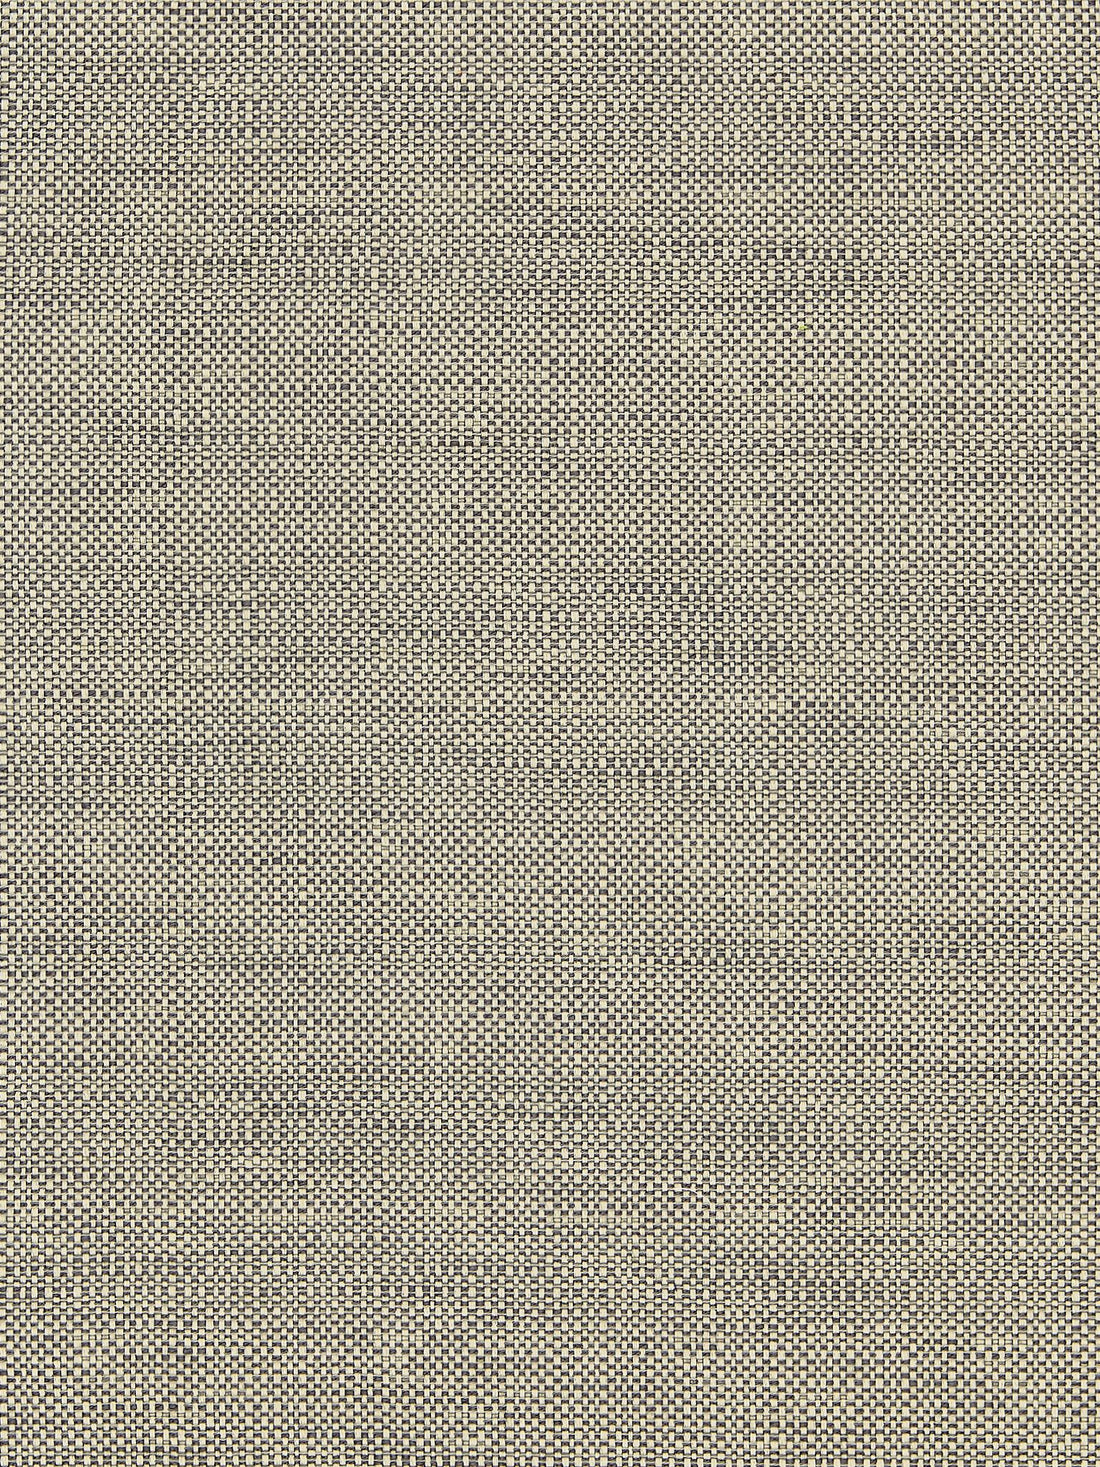 Chester Weave fabric in granite color - pattern number BK 0006K65118 - by Scalamandre in the Old World Weavers collection